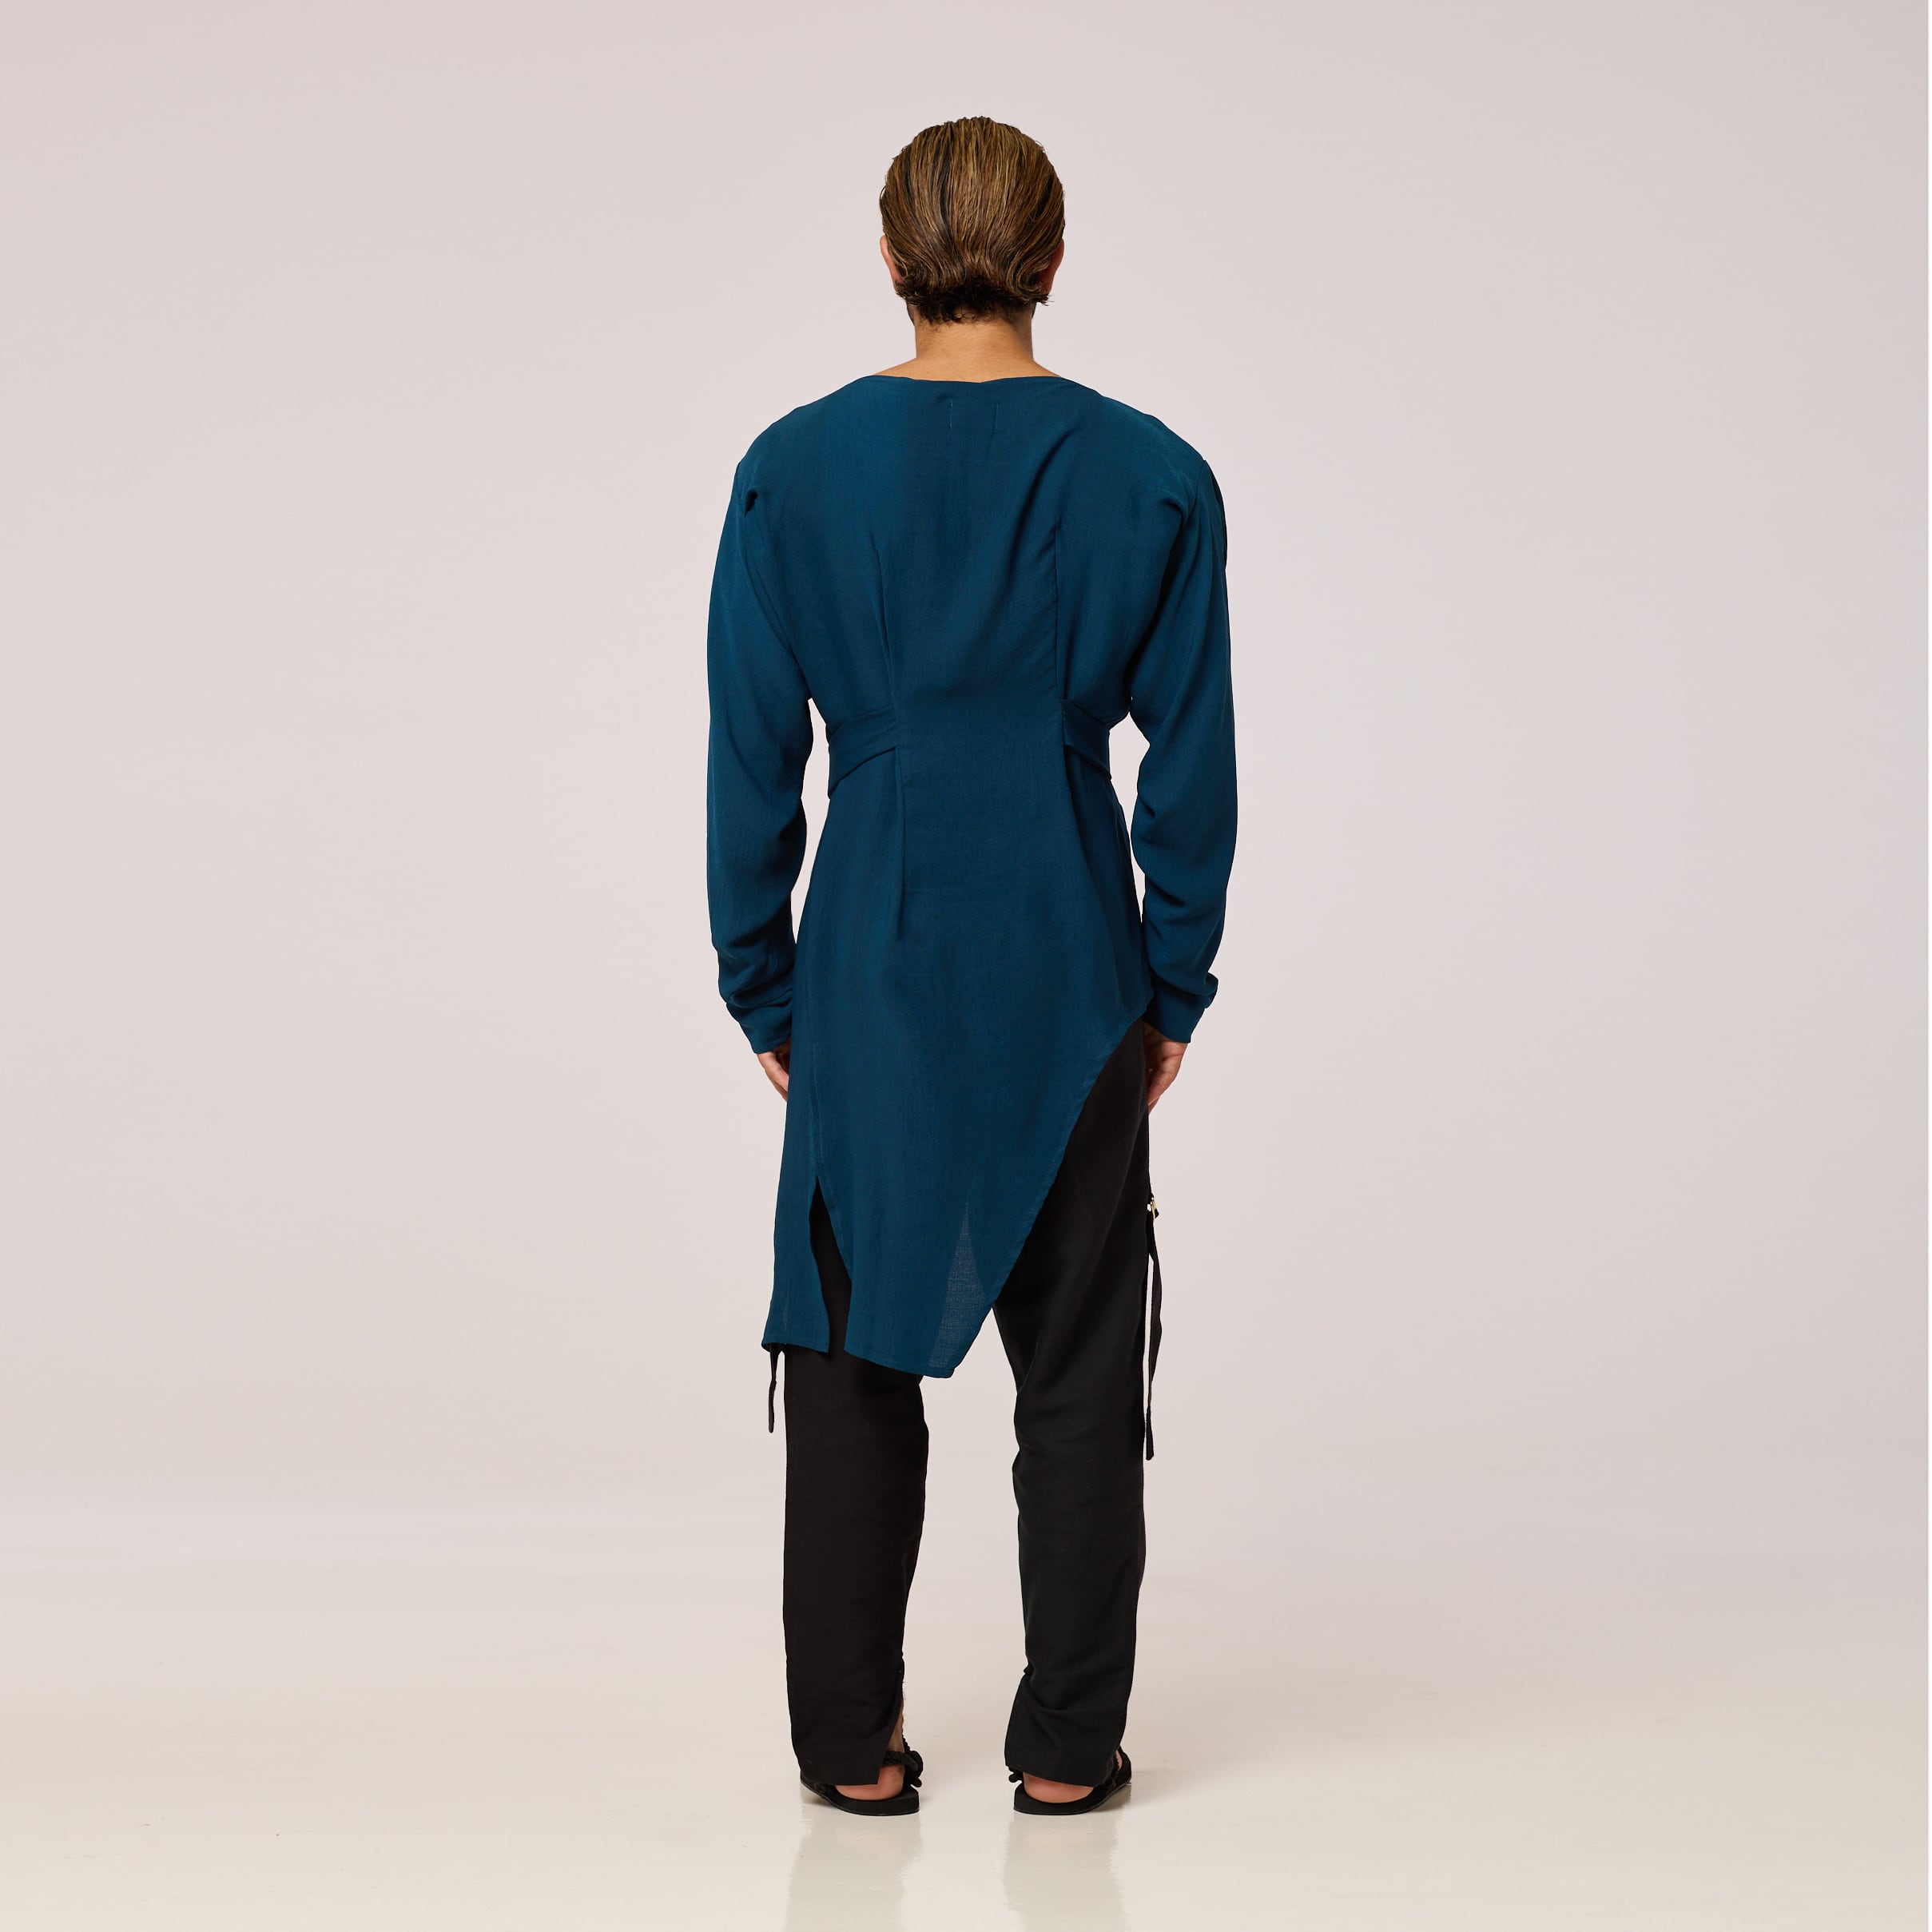 ZERØ London - Back view, mens zero waste long sleeve high/low shirt with bateau neck in teal blue, designed & made in London